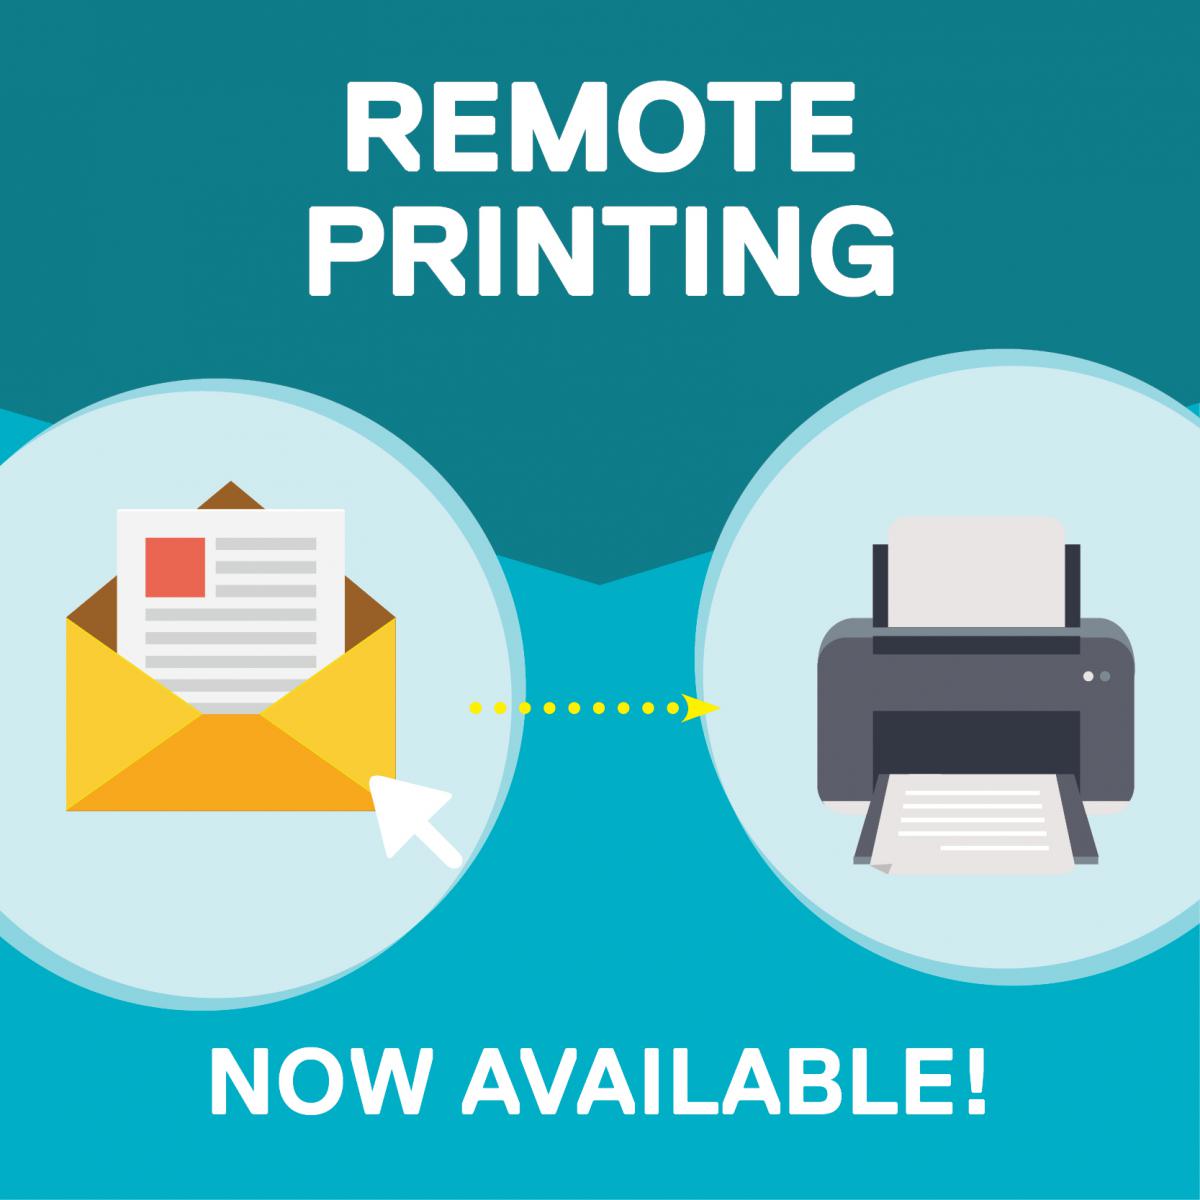 Remote printing now available